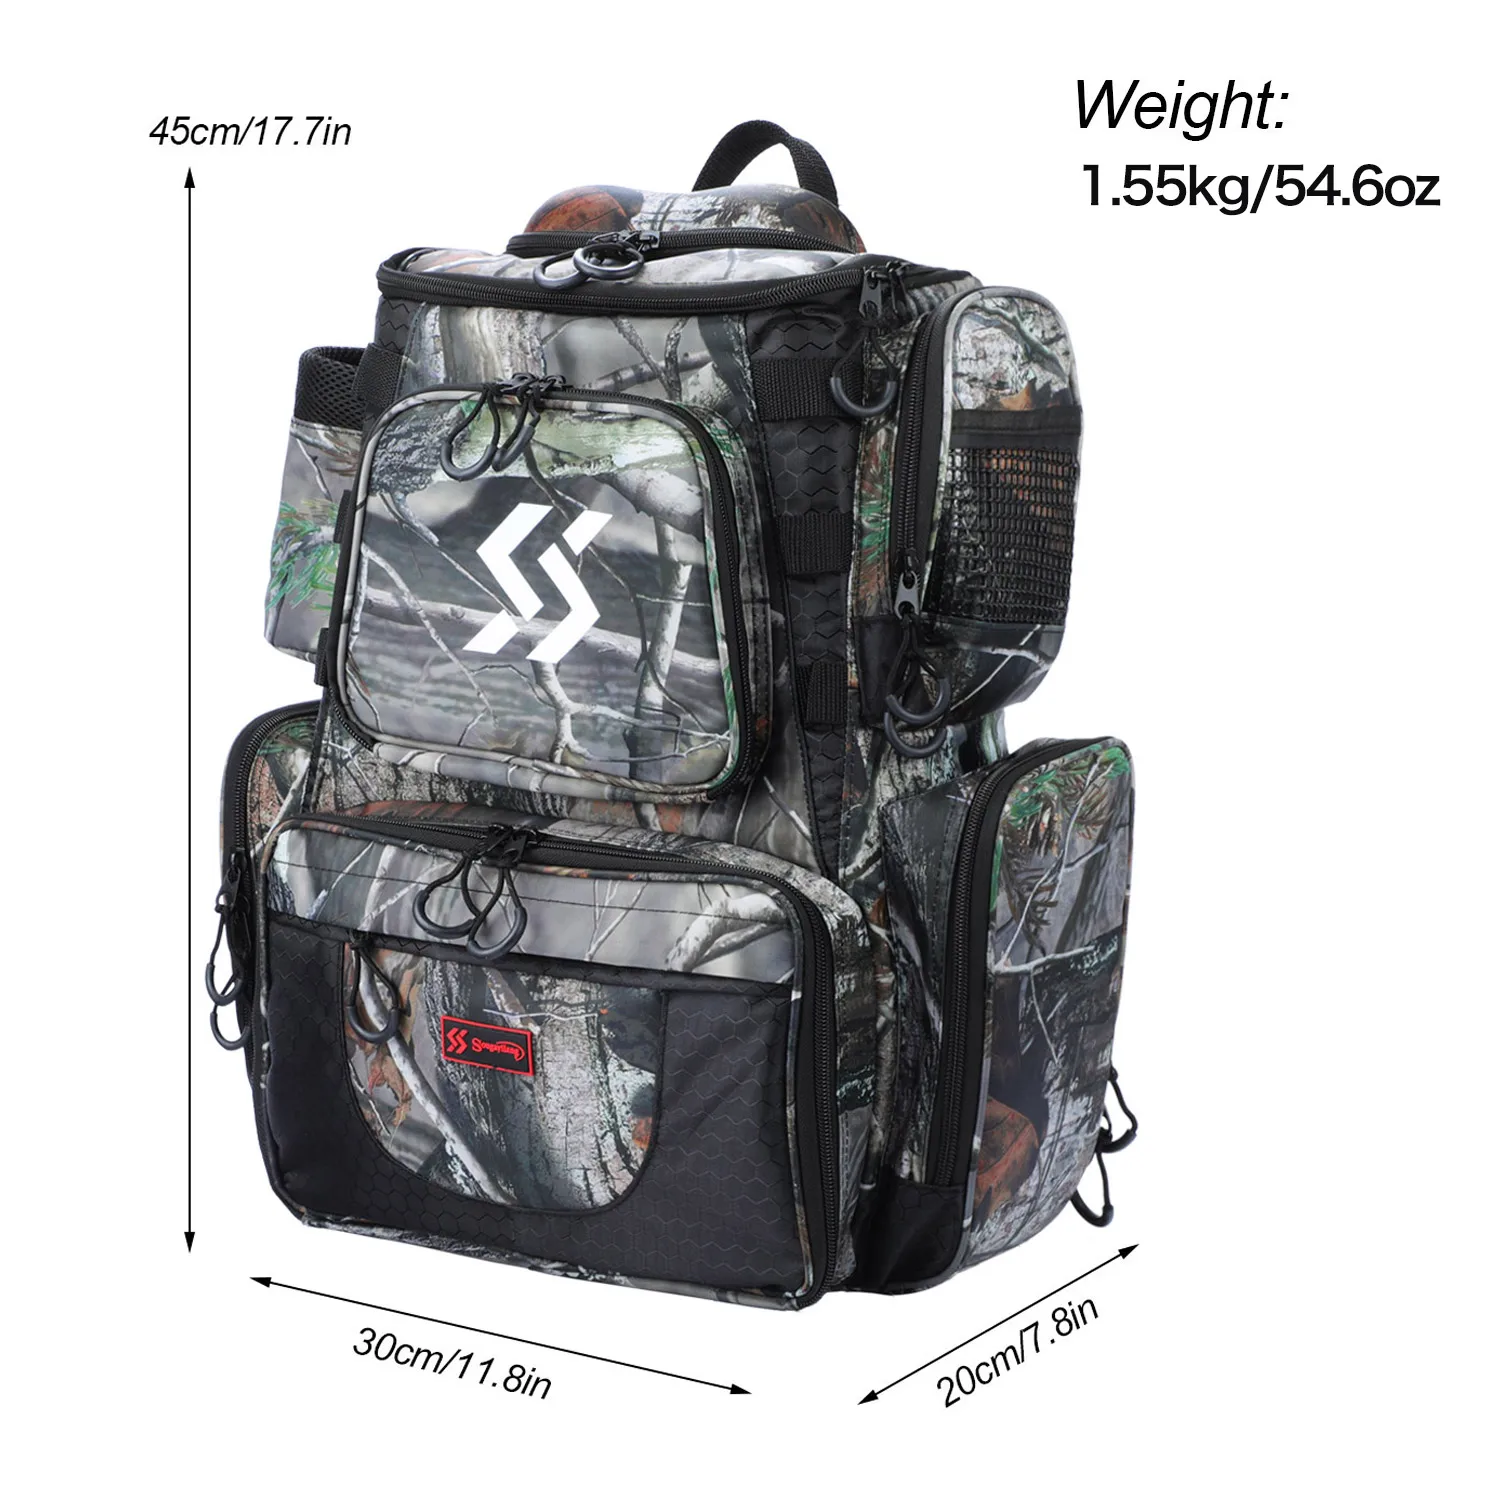 https://goodbaits.co.uk/wp-content/uploads/2024/01/Sougayilang-Fishing-Bags-Backpack-Waterproof-Tackle-Bag-Storage-with-Protective-Rain-Cover-for-Camping-Hiking-Fishing-1.webp